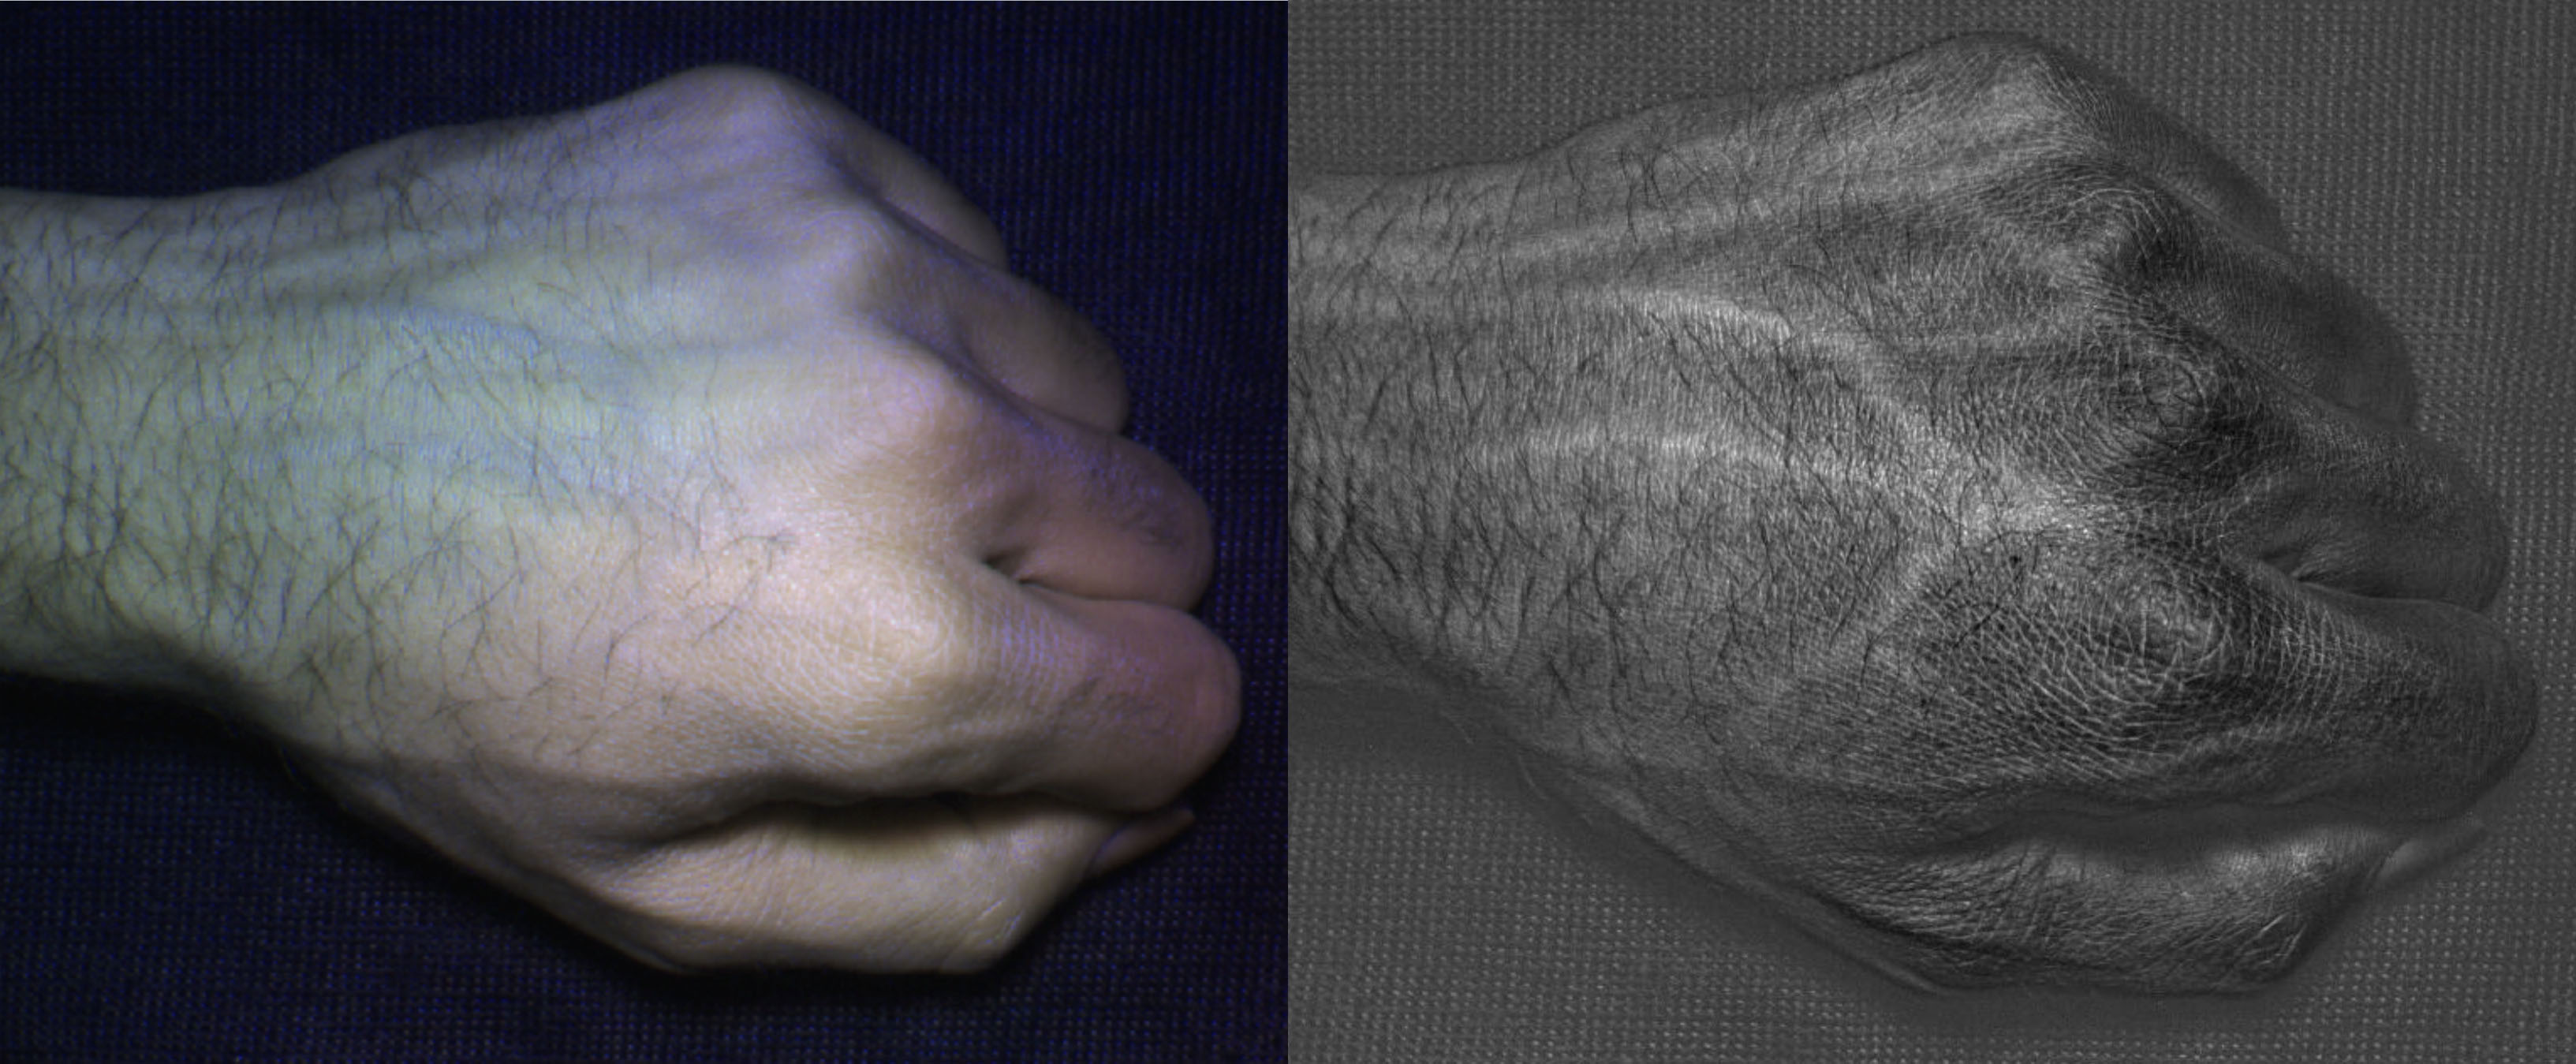 HyperCam images (right) reveal detailed vein and skin texture patterns that are unique to each individual